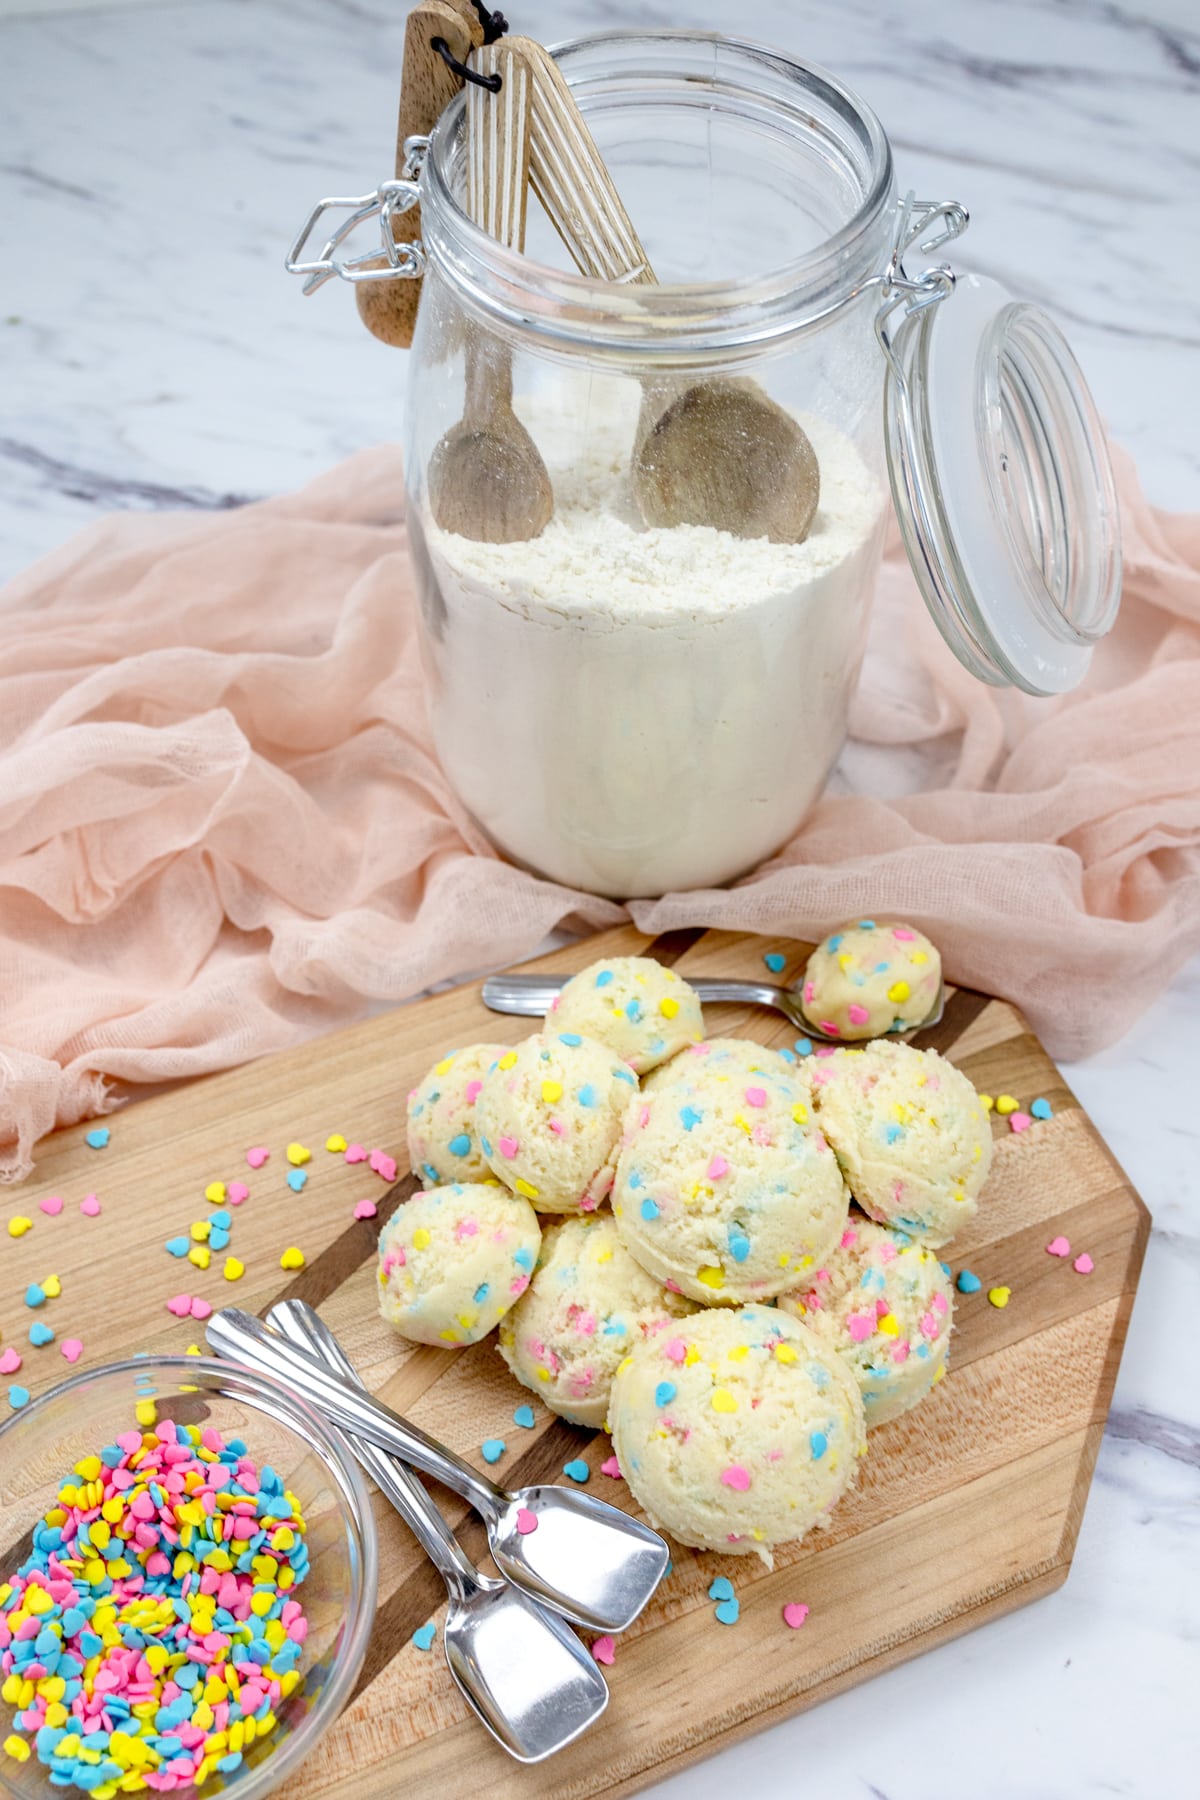 Close up view of edible cookie dough balls on the countertop, beside a storage jar of heat treated flour and a small bowl full of sprinkles.